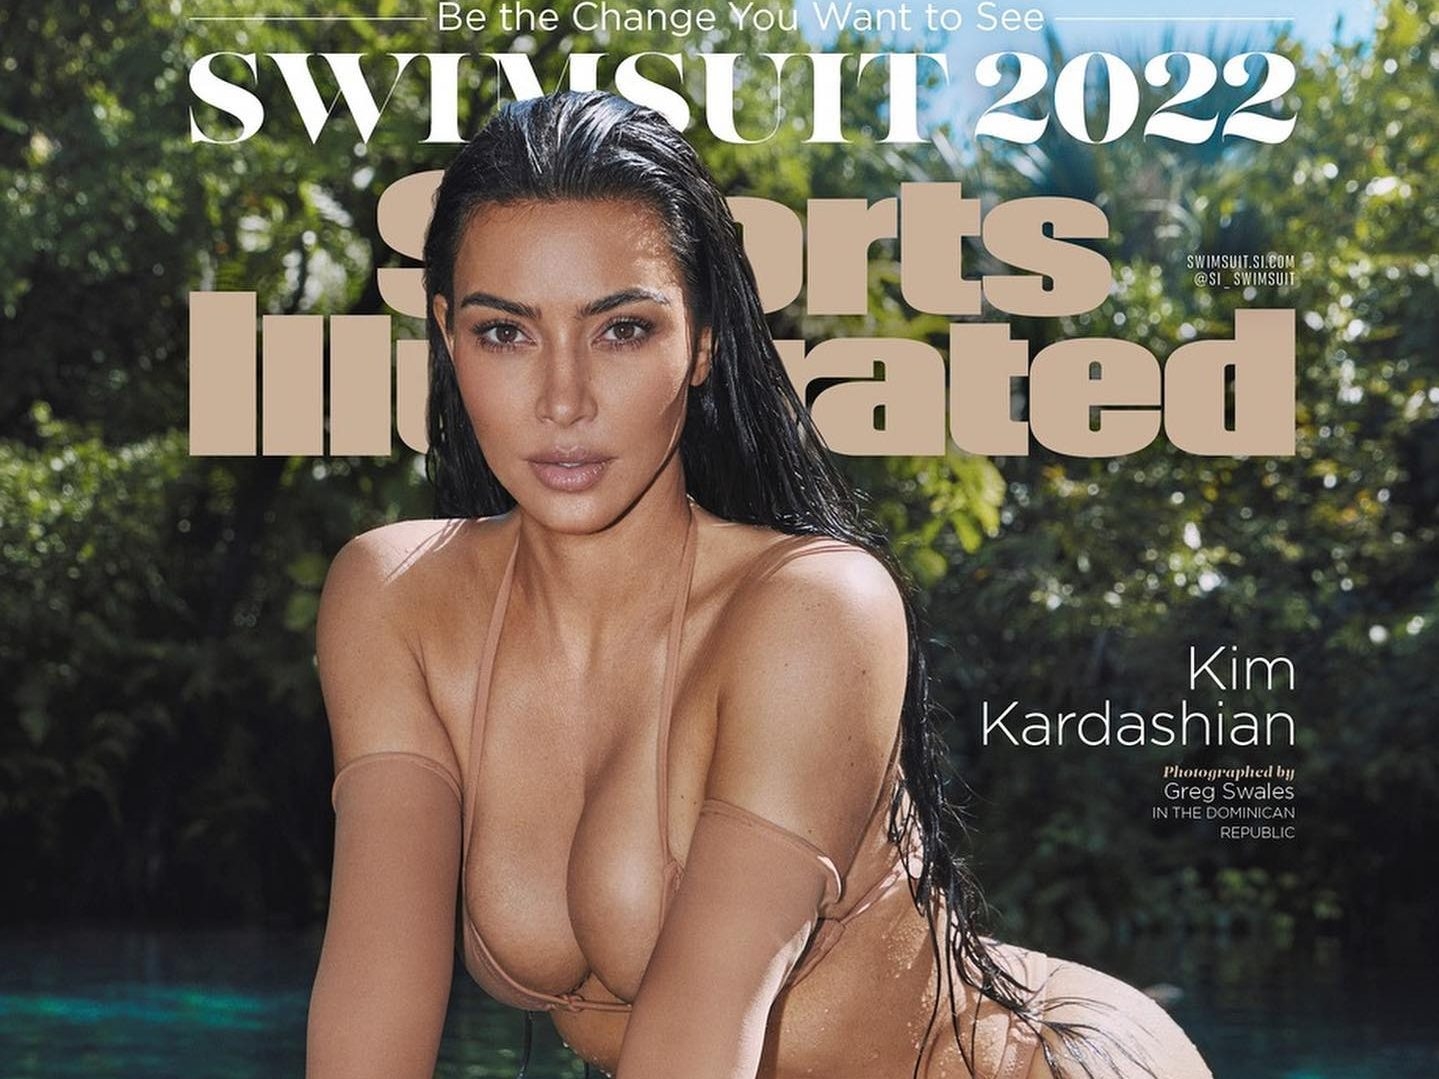 Kim Kardashian on cover of Sports Illustrated Swimsuit issue.